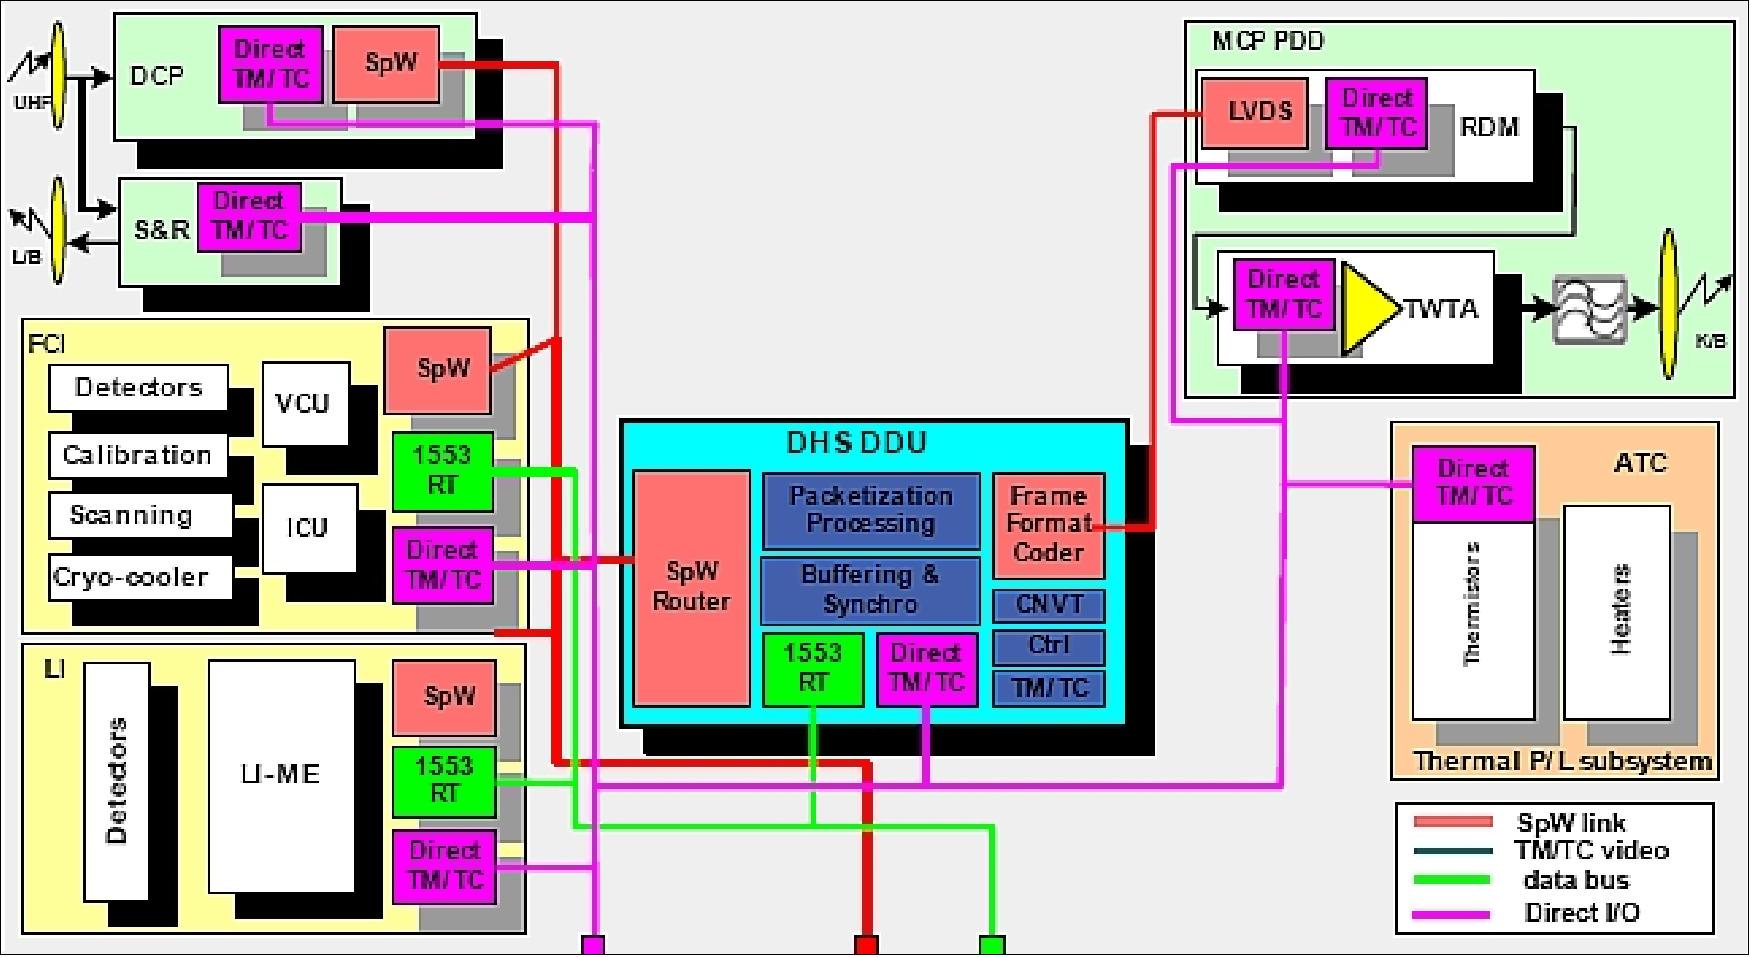 Figure 7: On-board data handling architecture of the MTG-I spacecraft (image credit: TAS)